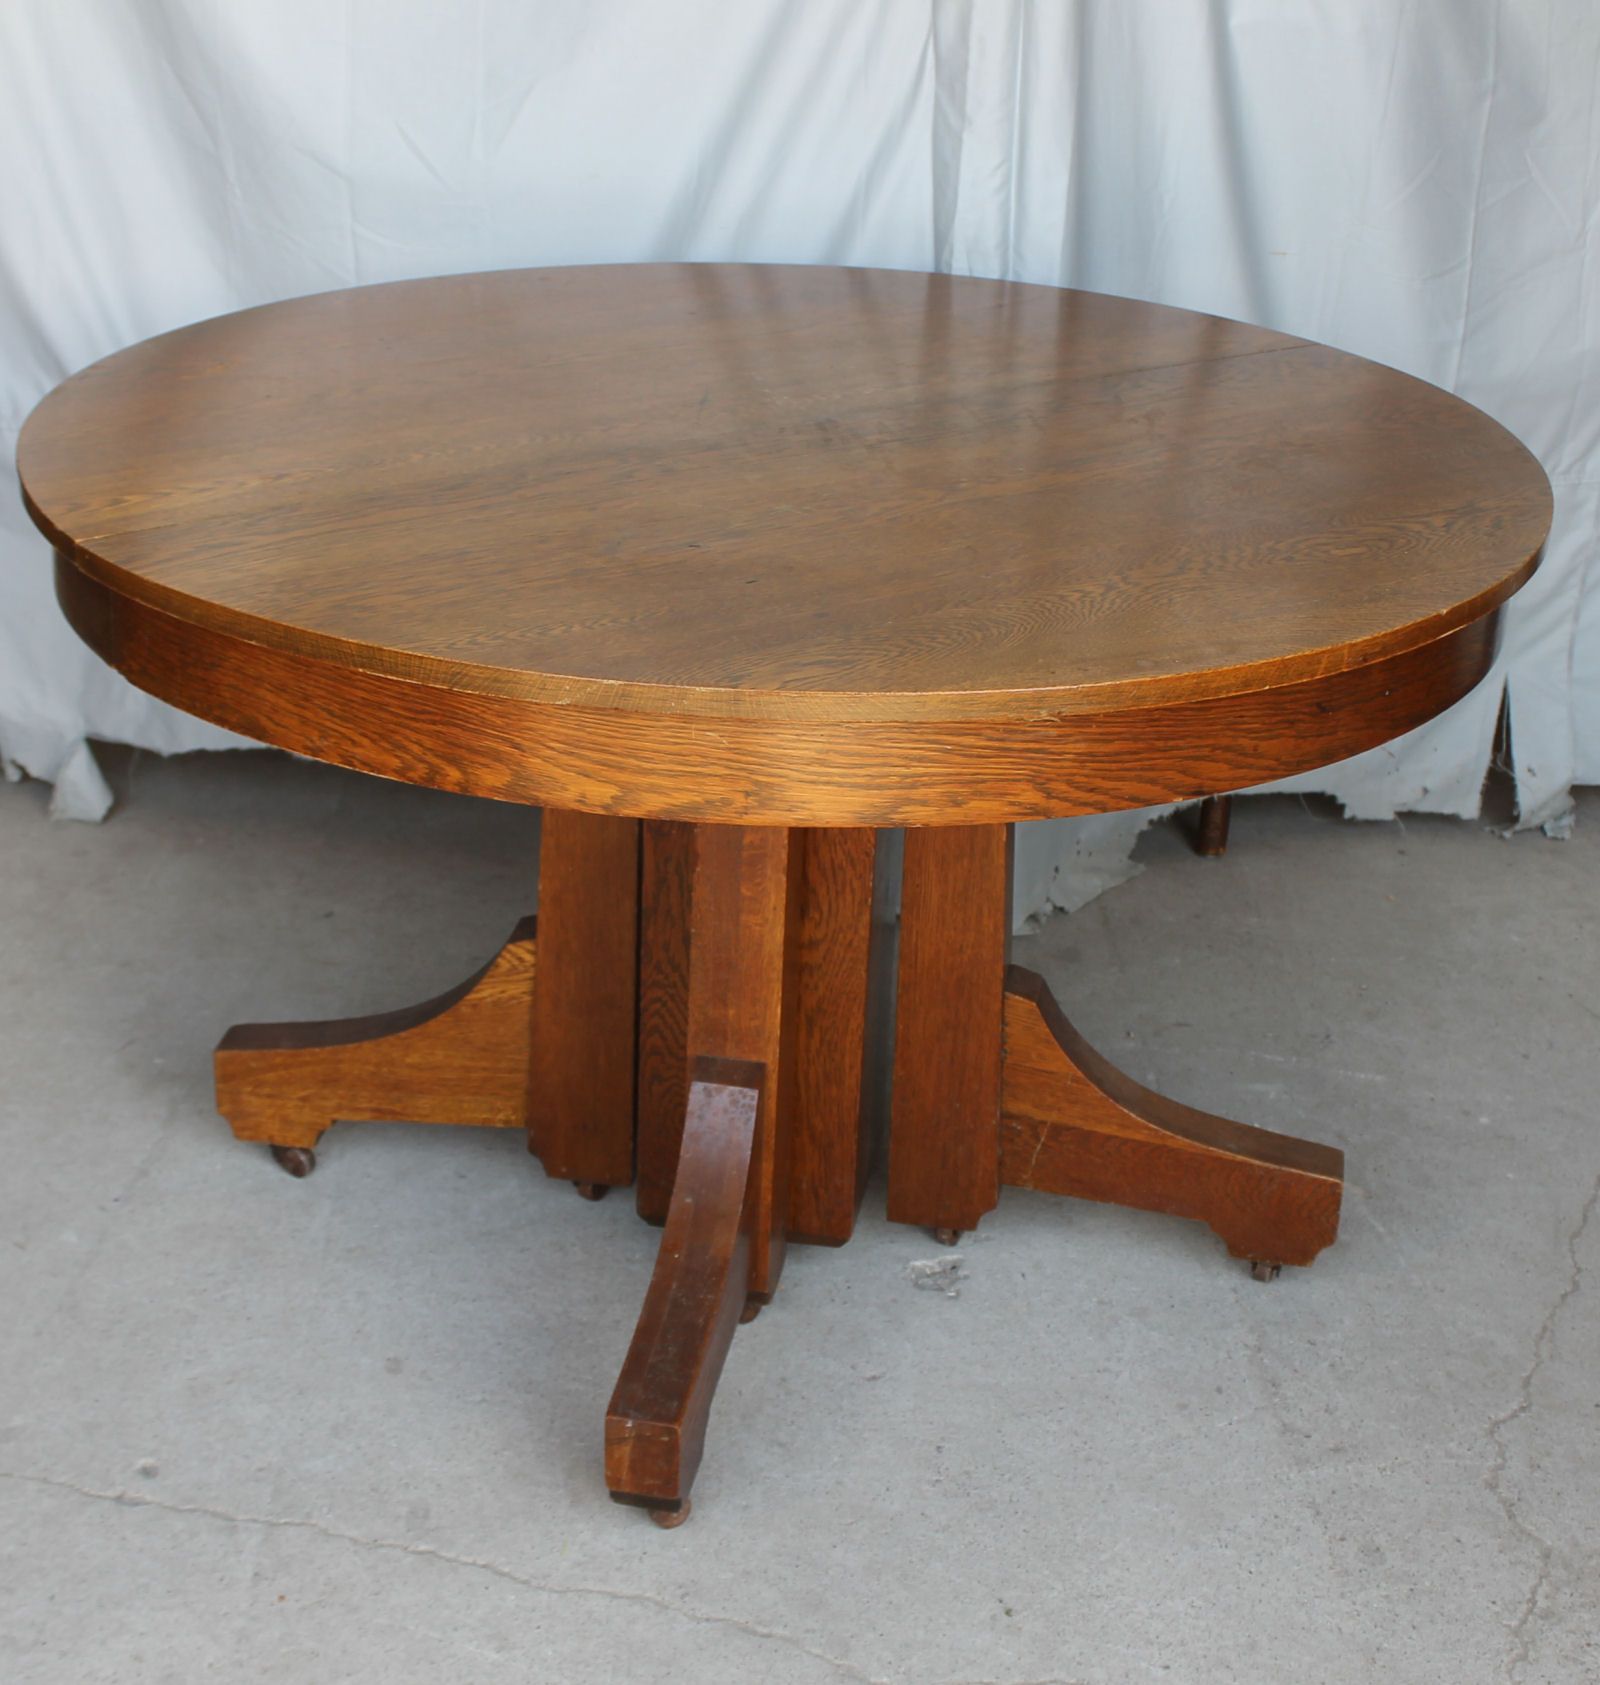 Bargain John'S Antiques | Antique Mission Style Round Oak Inside Most Up To Date Vintage Brown Round Dining Tables (View 9 of 15)